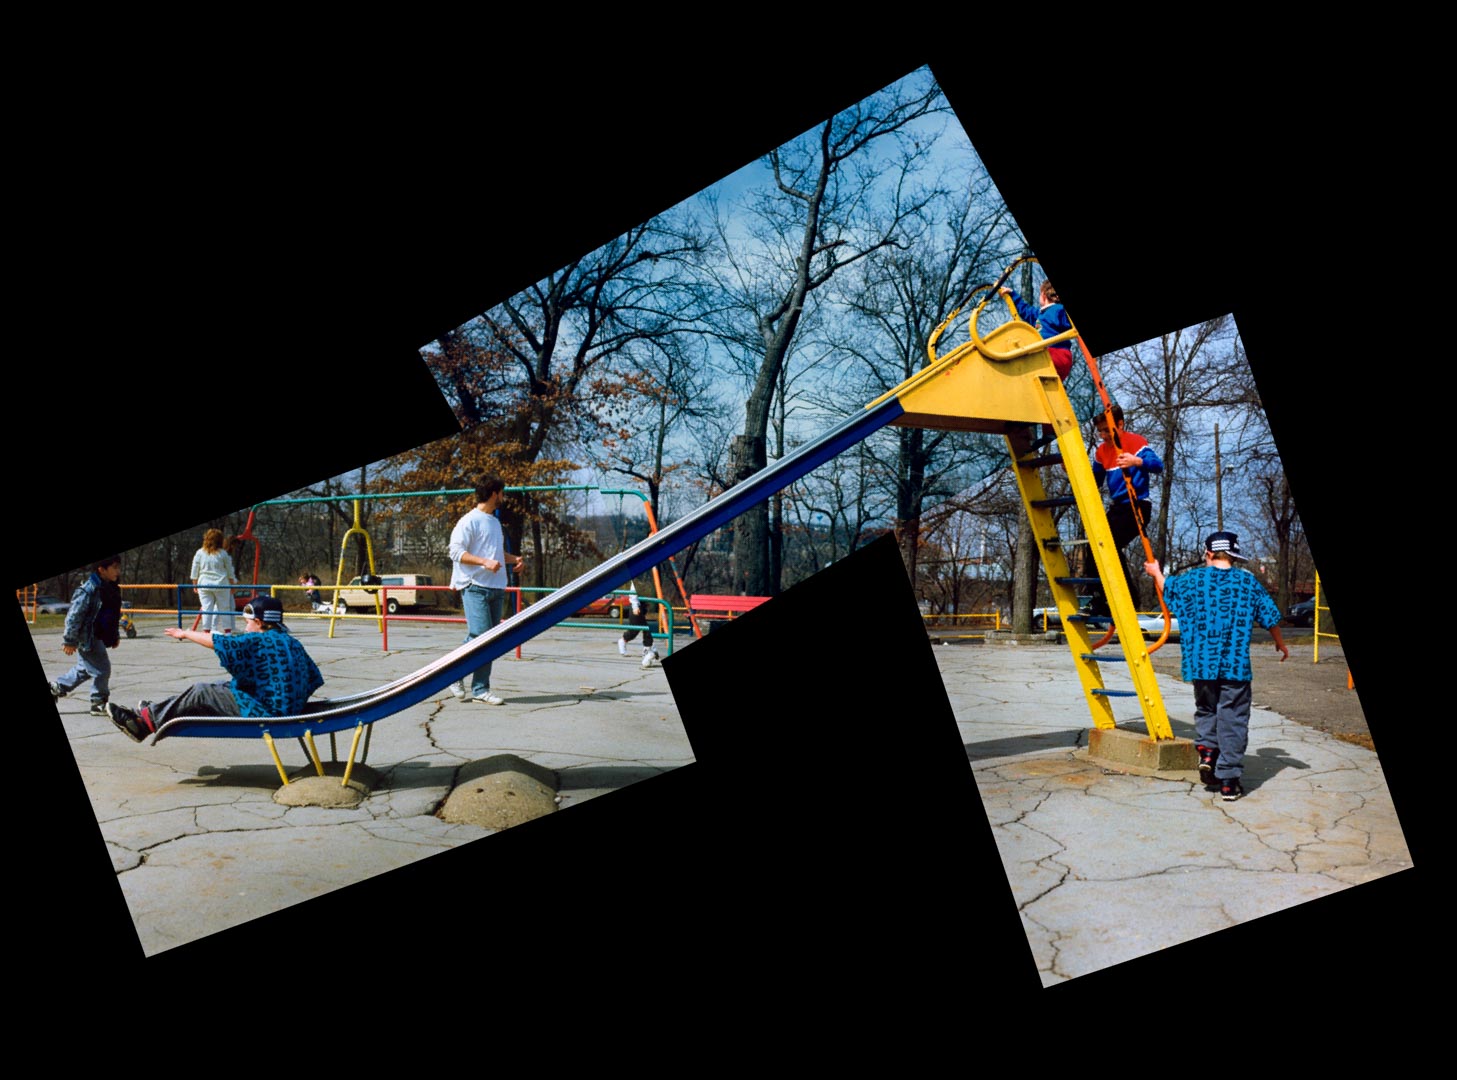 "Boys on the Slide", North Side, Pittsburgh Pennsylvania, Retinal Memories Series, 1990, Contemporary Art Photography,  Sequence Photography, Color Film Photography